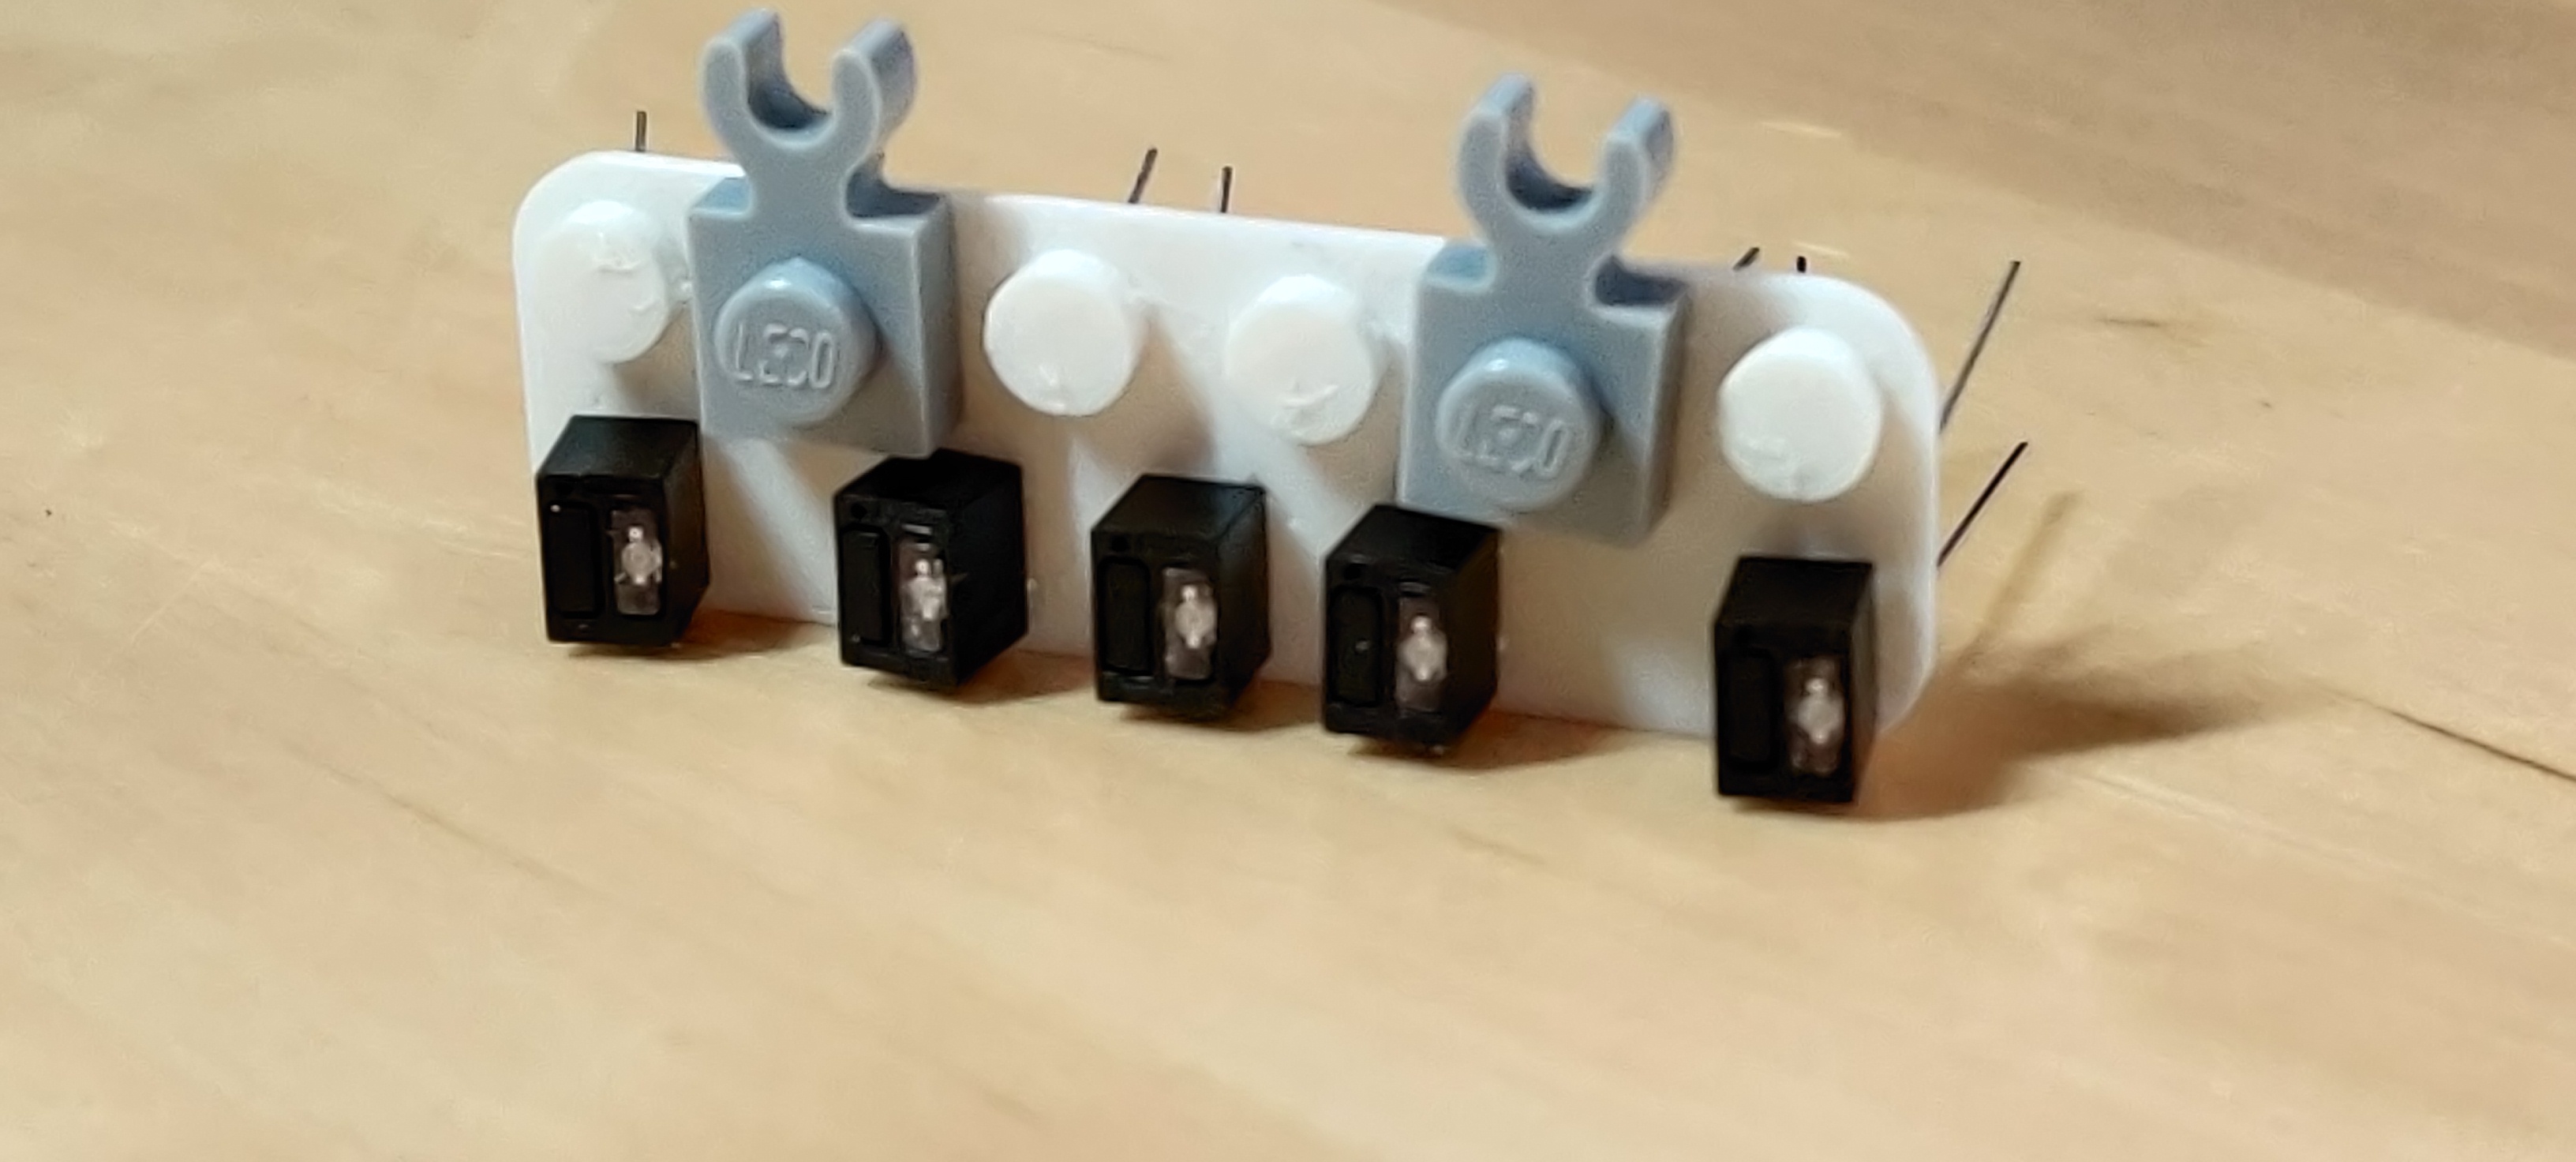 white plastic 3D-printed rectangle, 6×2 Lego studs in size,
with standard-sized studs only along one long side; 5 QRD1114
sensors occupy one long side, and 2 Lego 1×1 plates with C
clip are on the other side